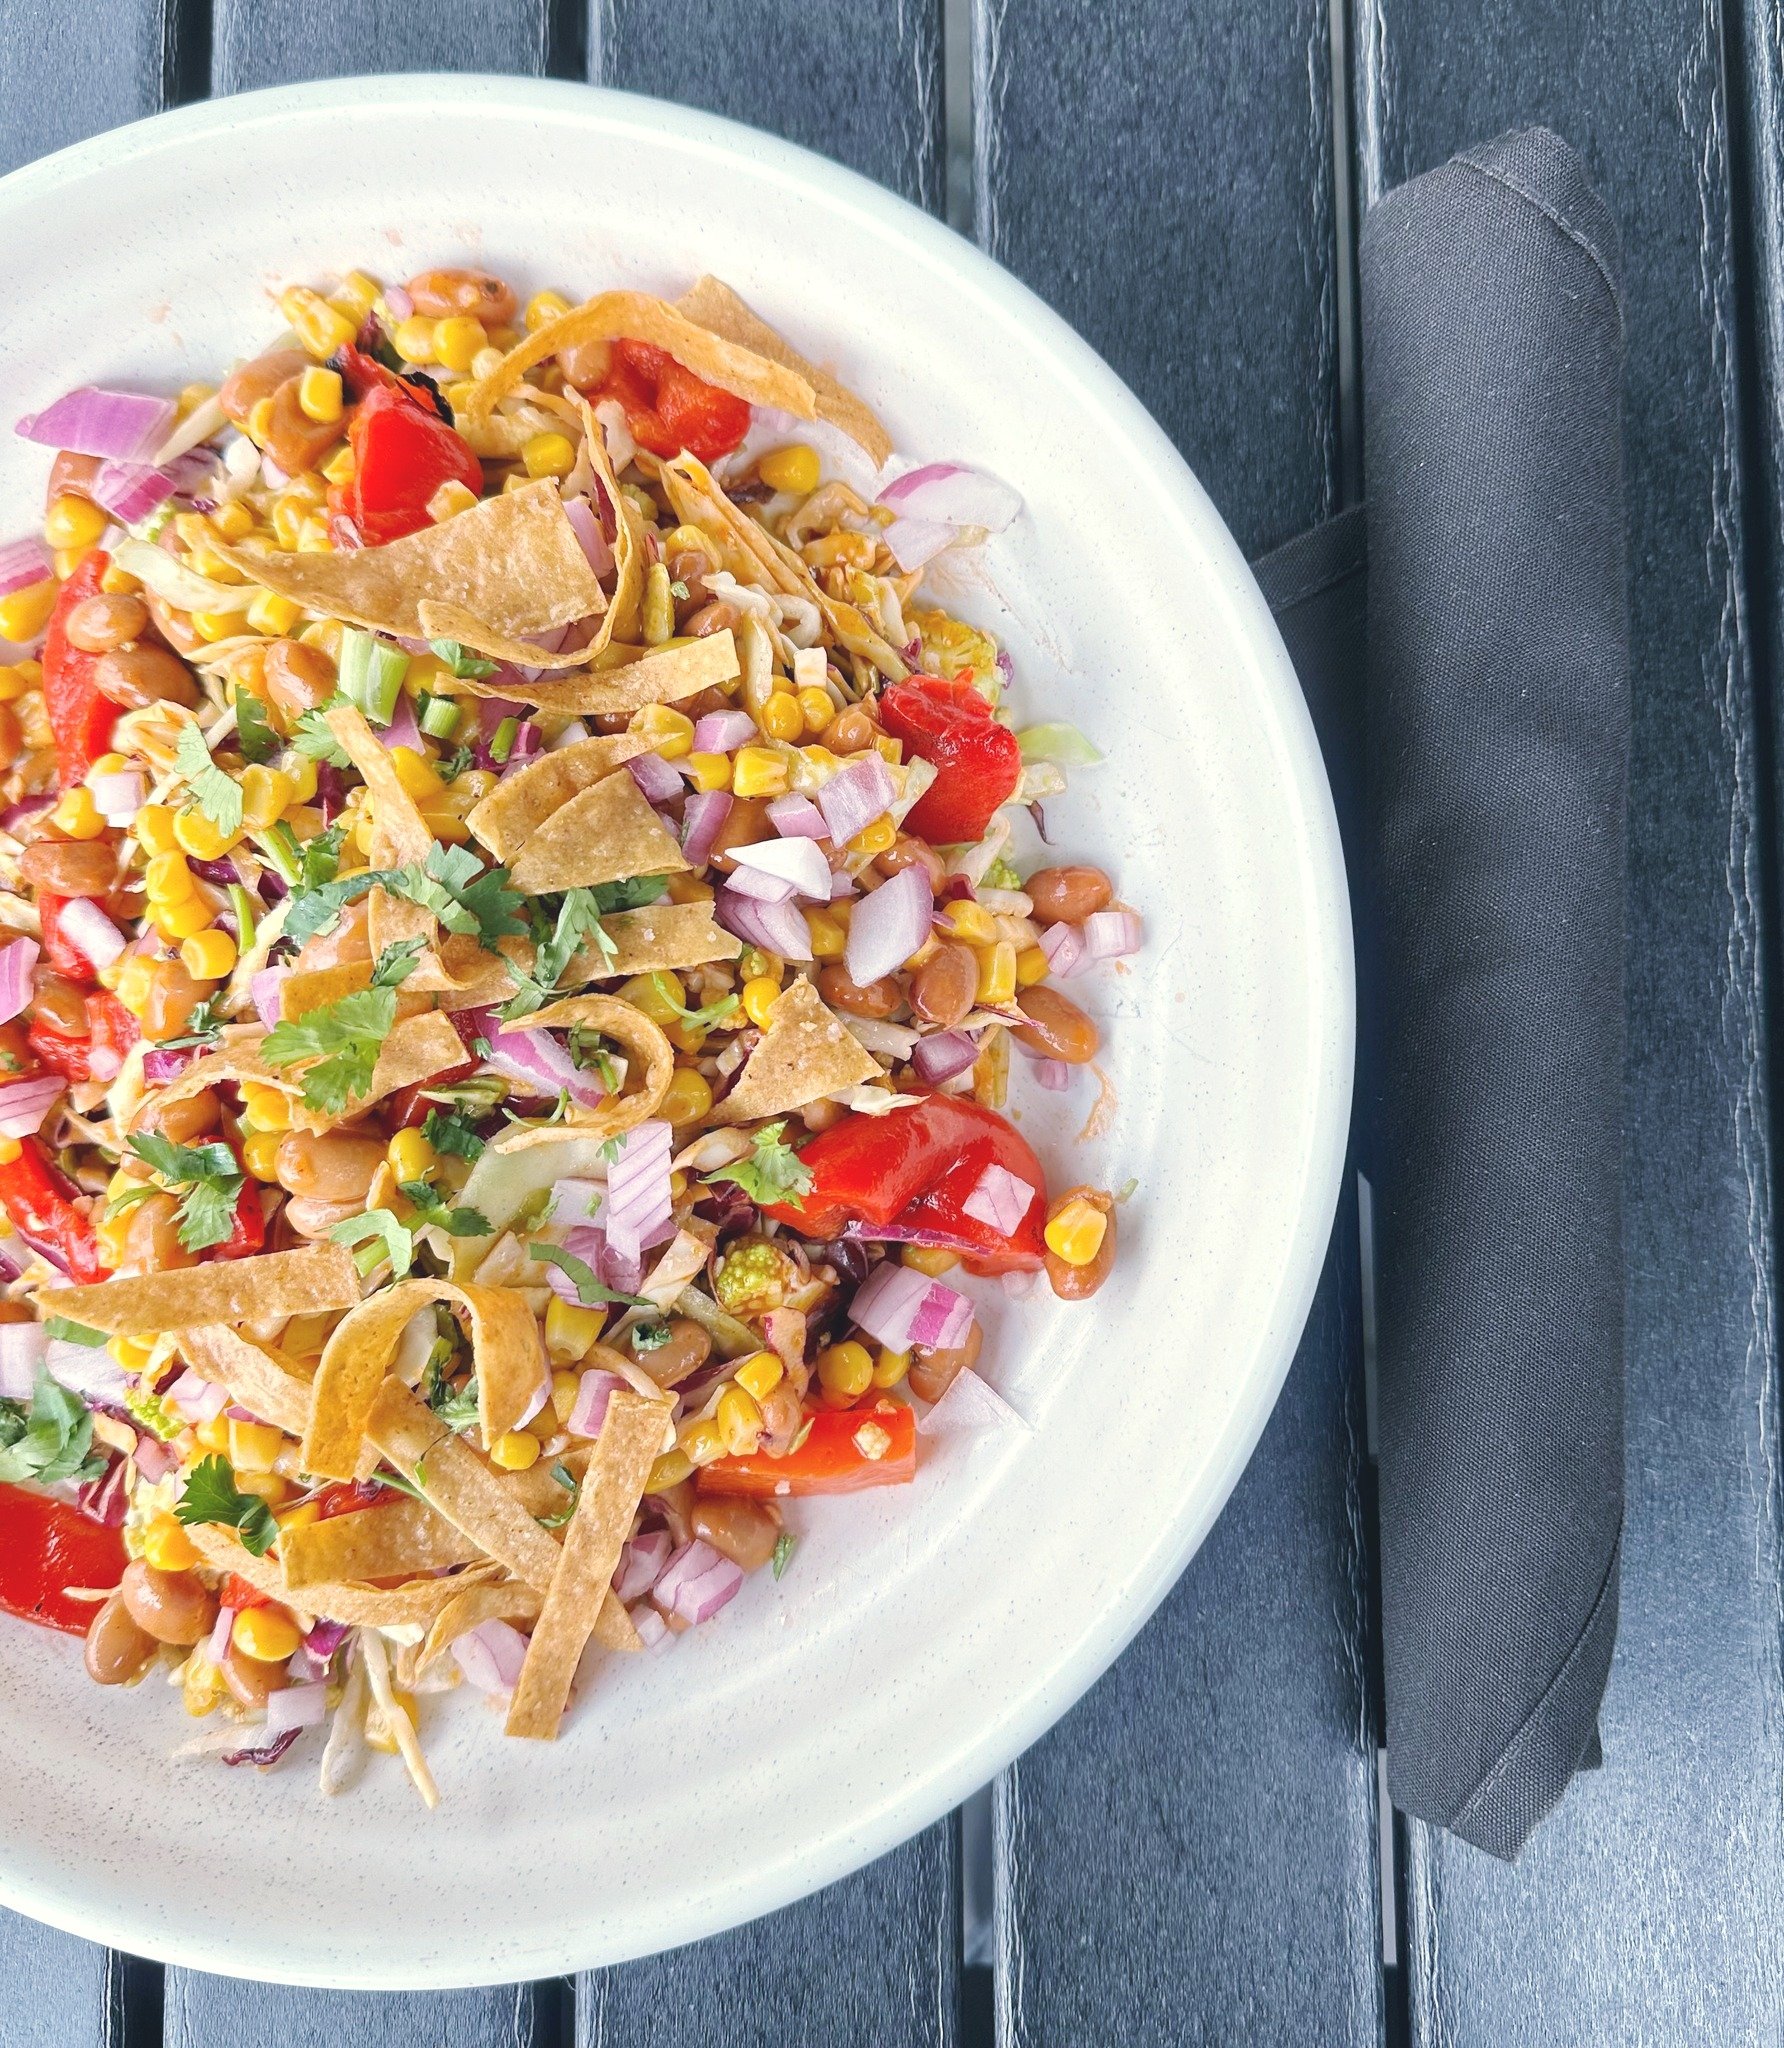 Have you tried our new Santa Fe Cruciferous Salad? We mix shredded cabbage, kale, and cauliflower in our chipotle catalina dressing then top it with sweet corn, pinto beans, red onion, roasted red peppers, cilantro, chopped almonds, and tortilla stri